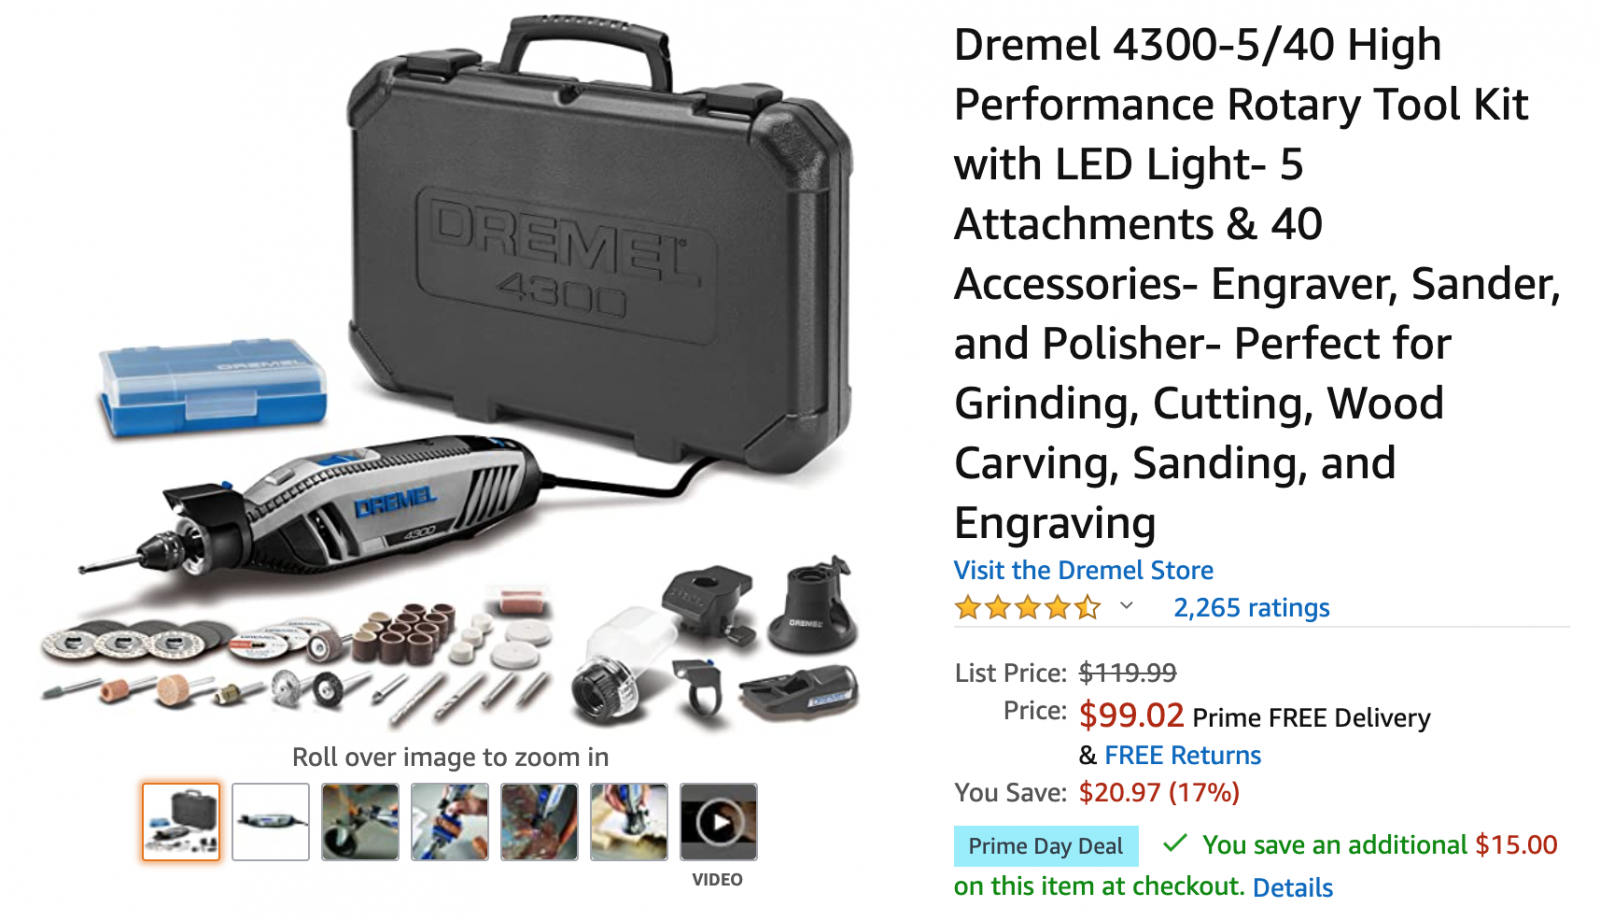 Top 5 Best Dremel For Wood Carving 2018 